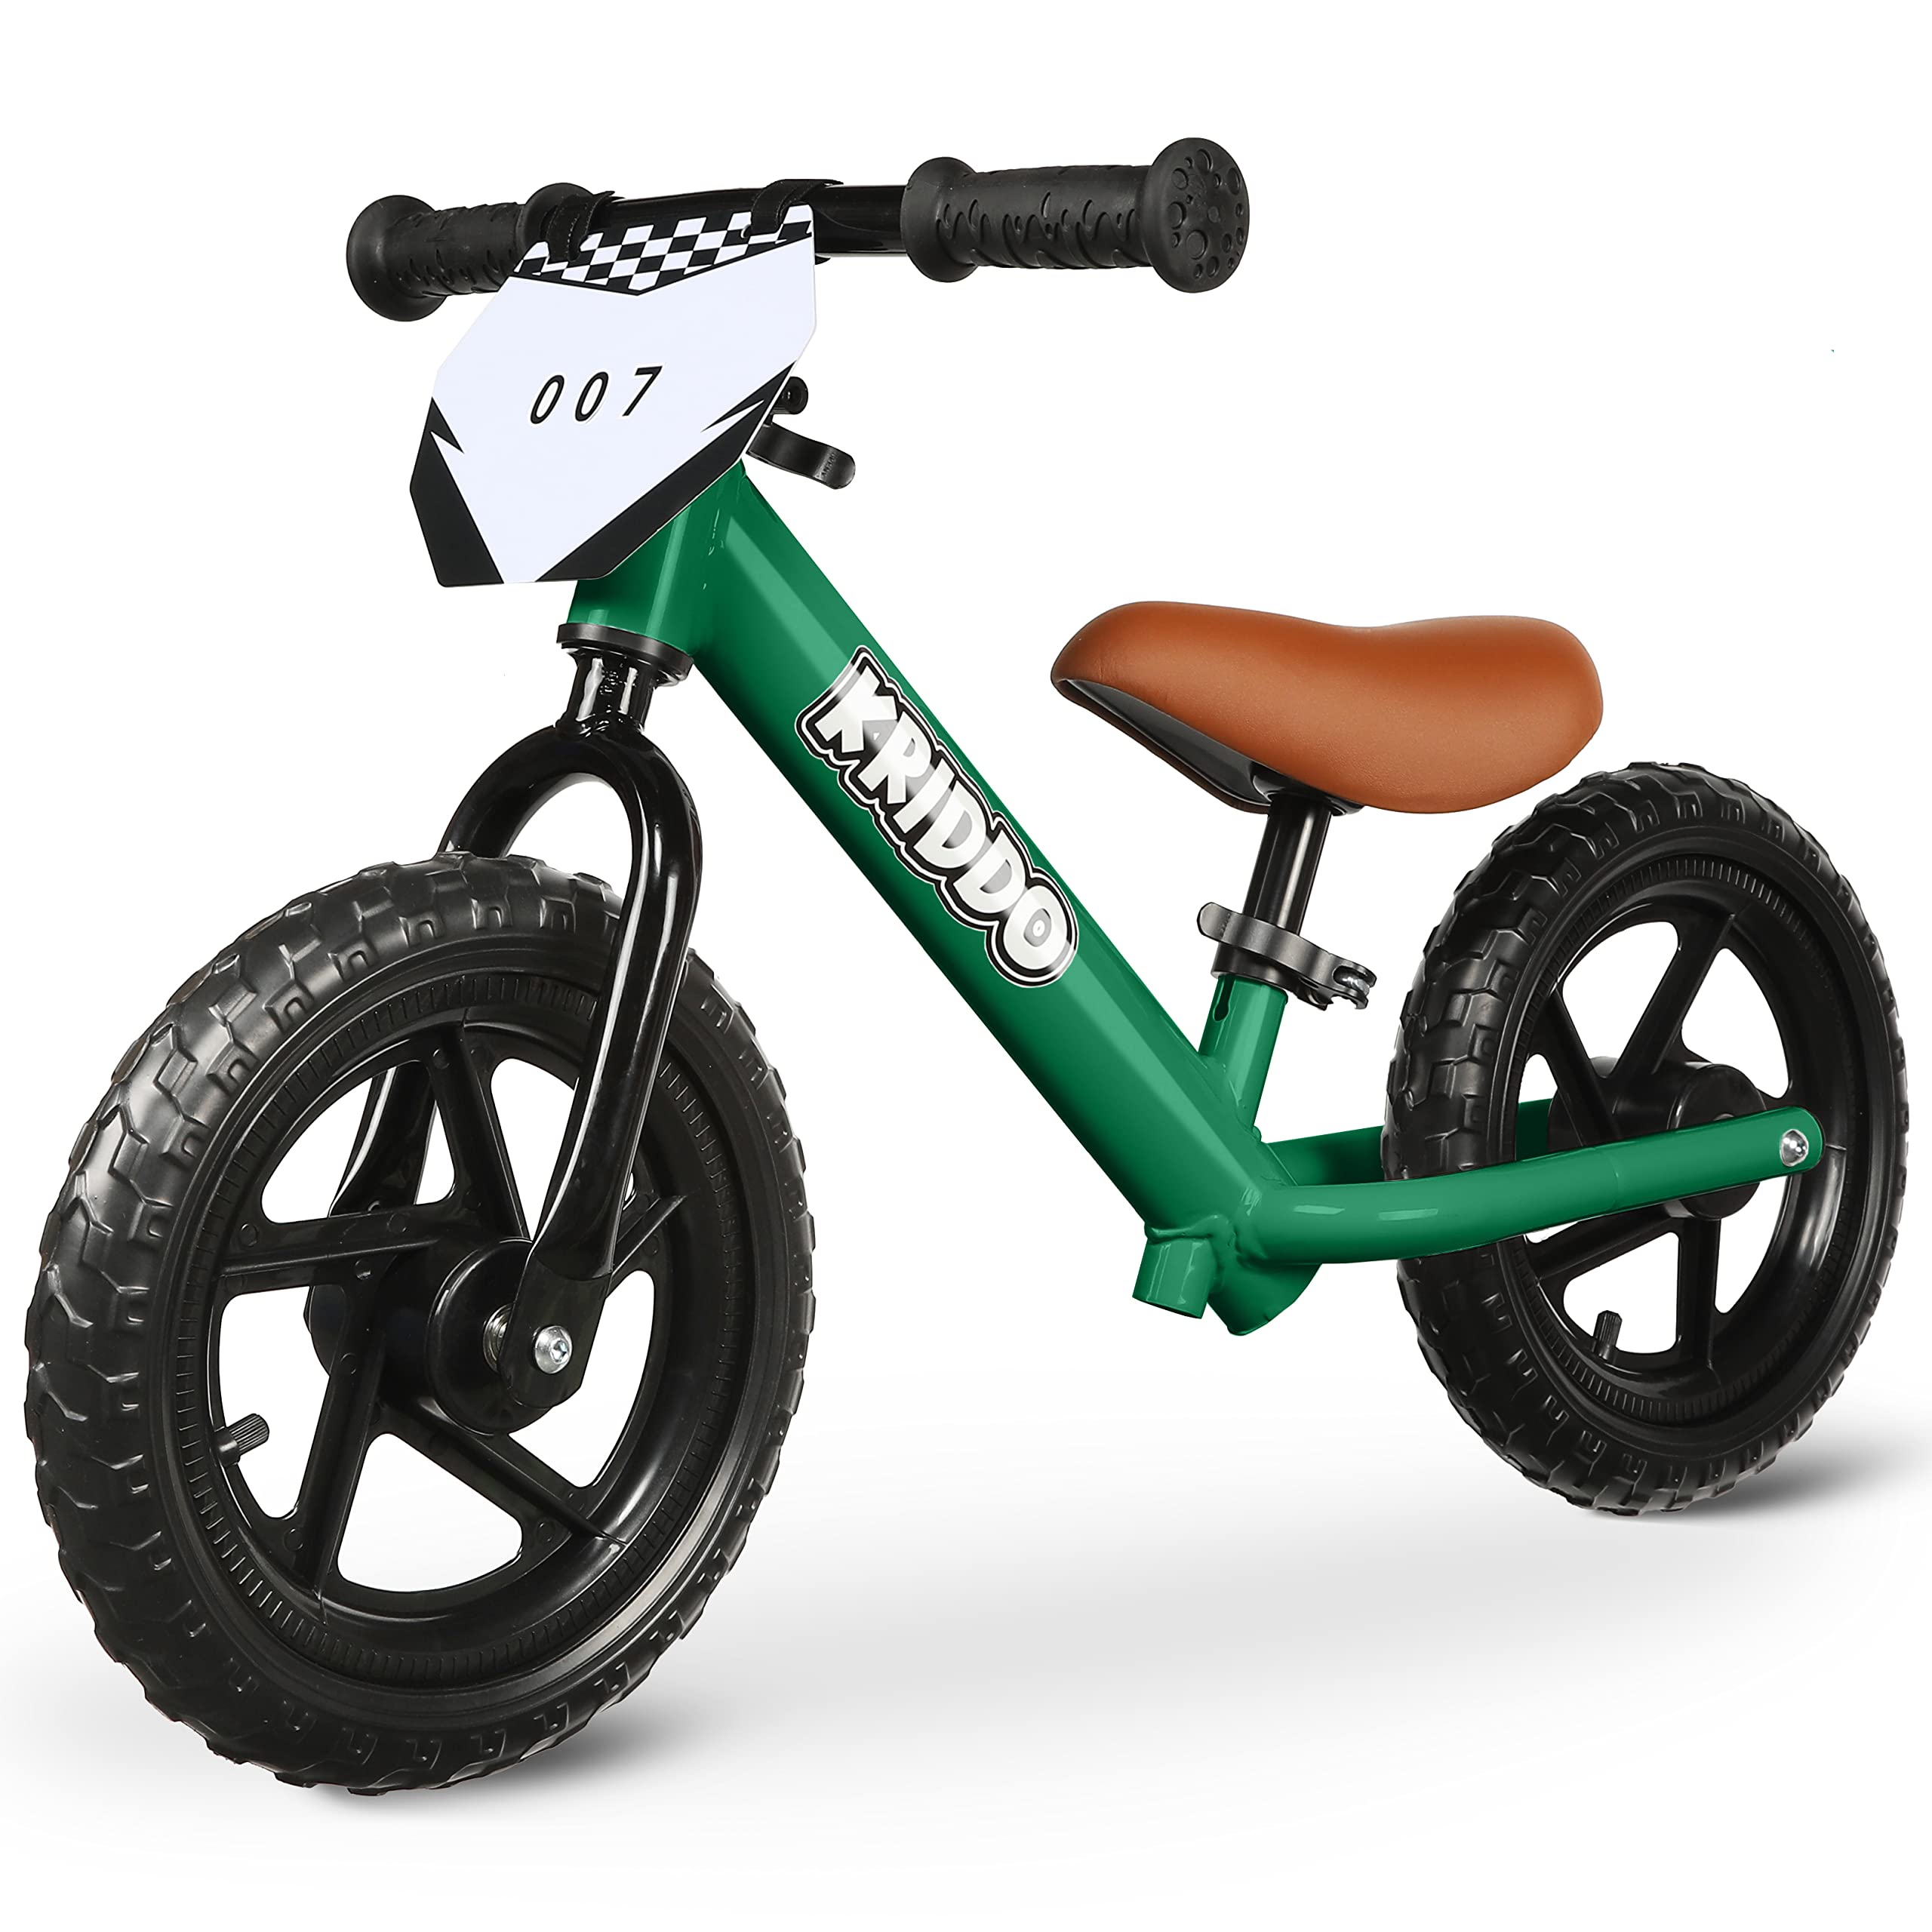 KRIDDO Toddler Balance Bike 2 Year Old, Age 18 Months to 5 Years Old, 12 Inch Push Bicycle with Customize Plate (3 Sets of Stickers Included), Steady Balancing, Gift Bike for 2-3 Boys Girls, Green